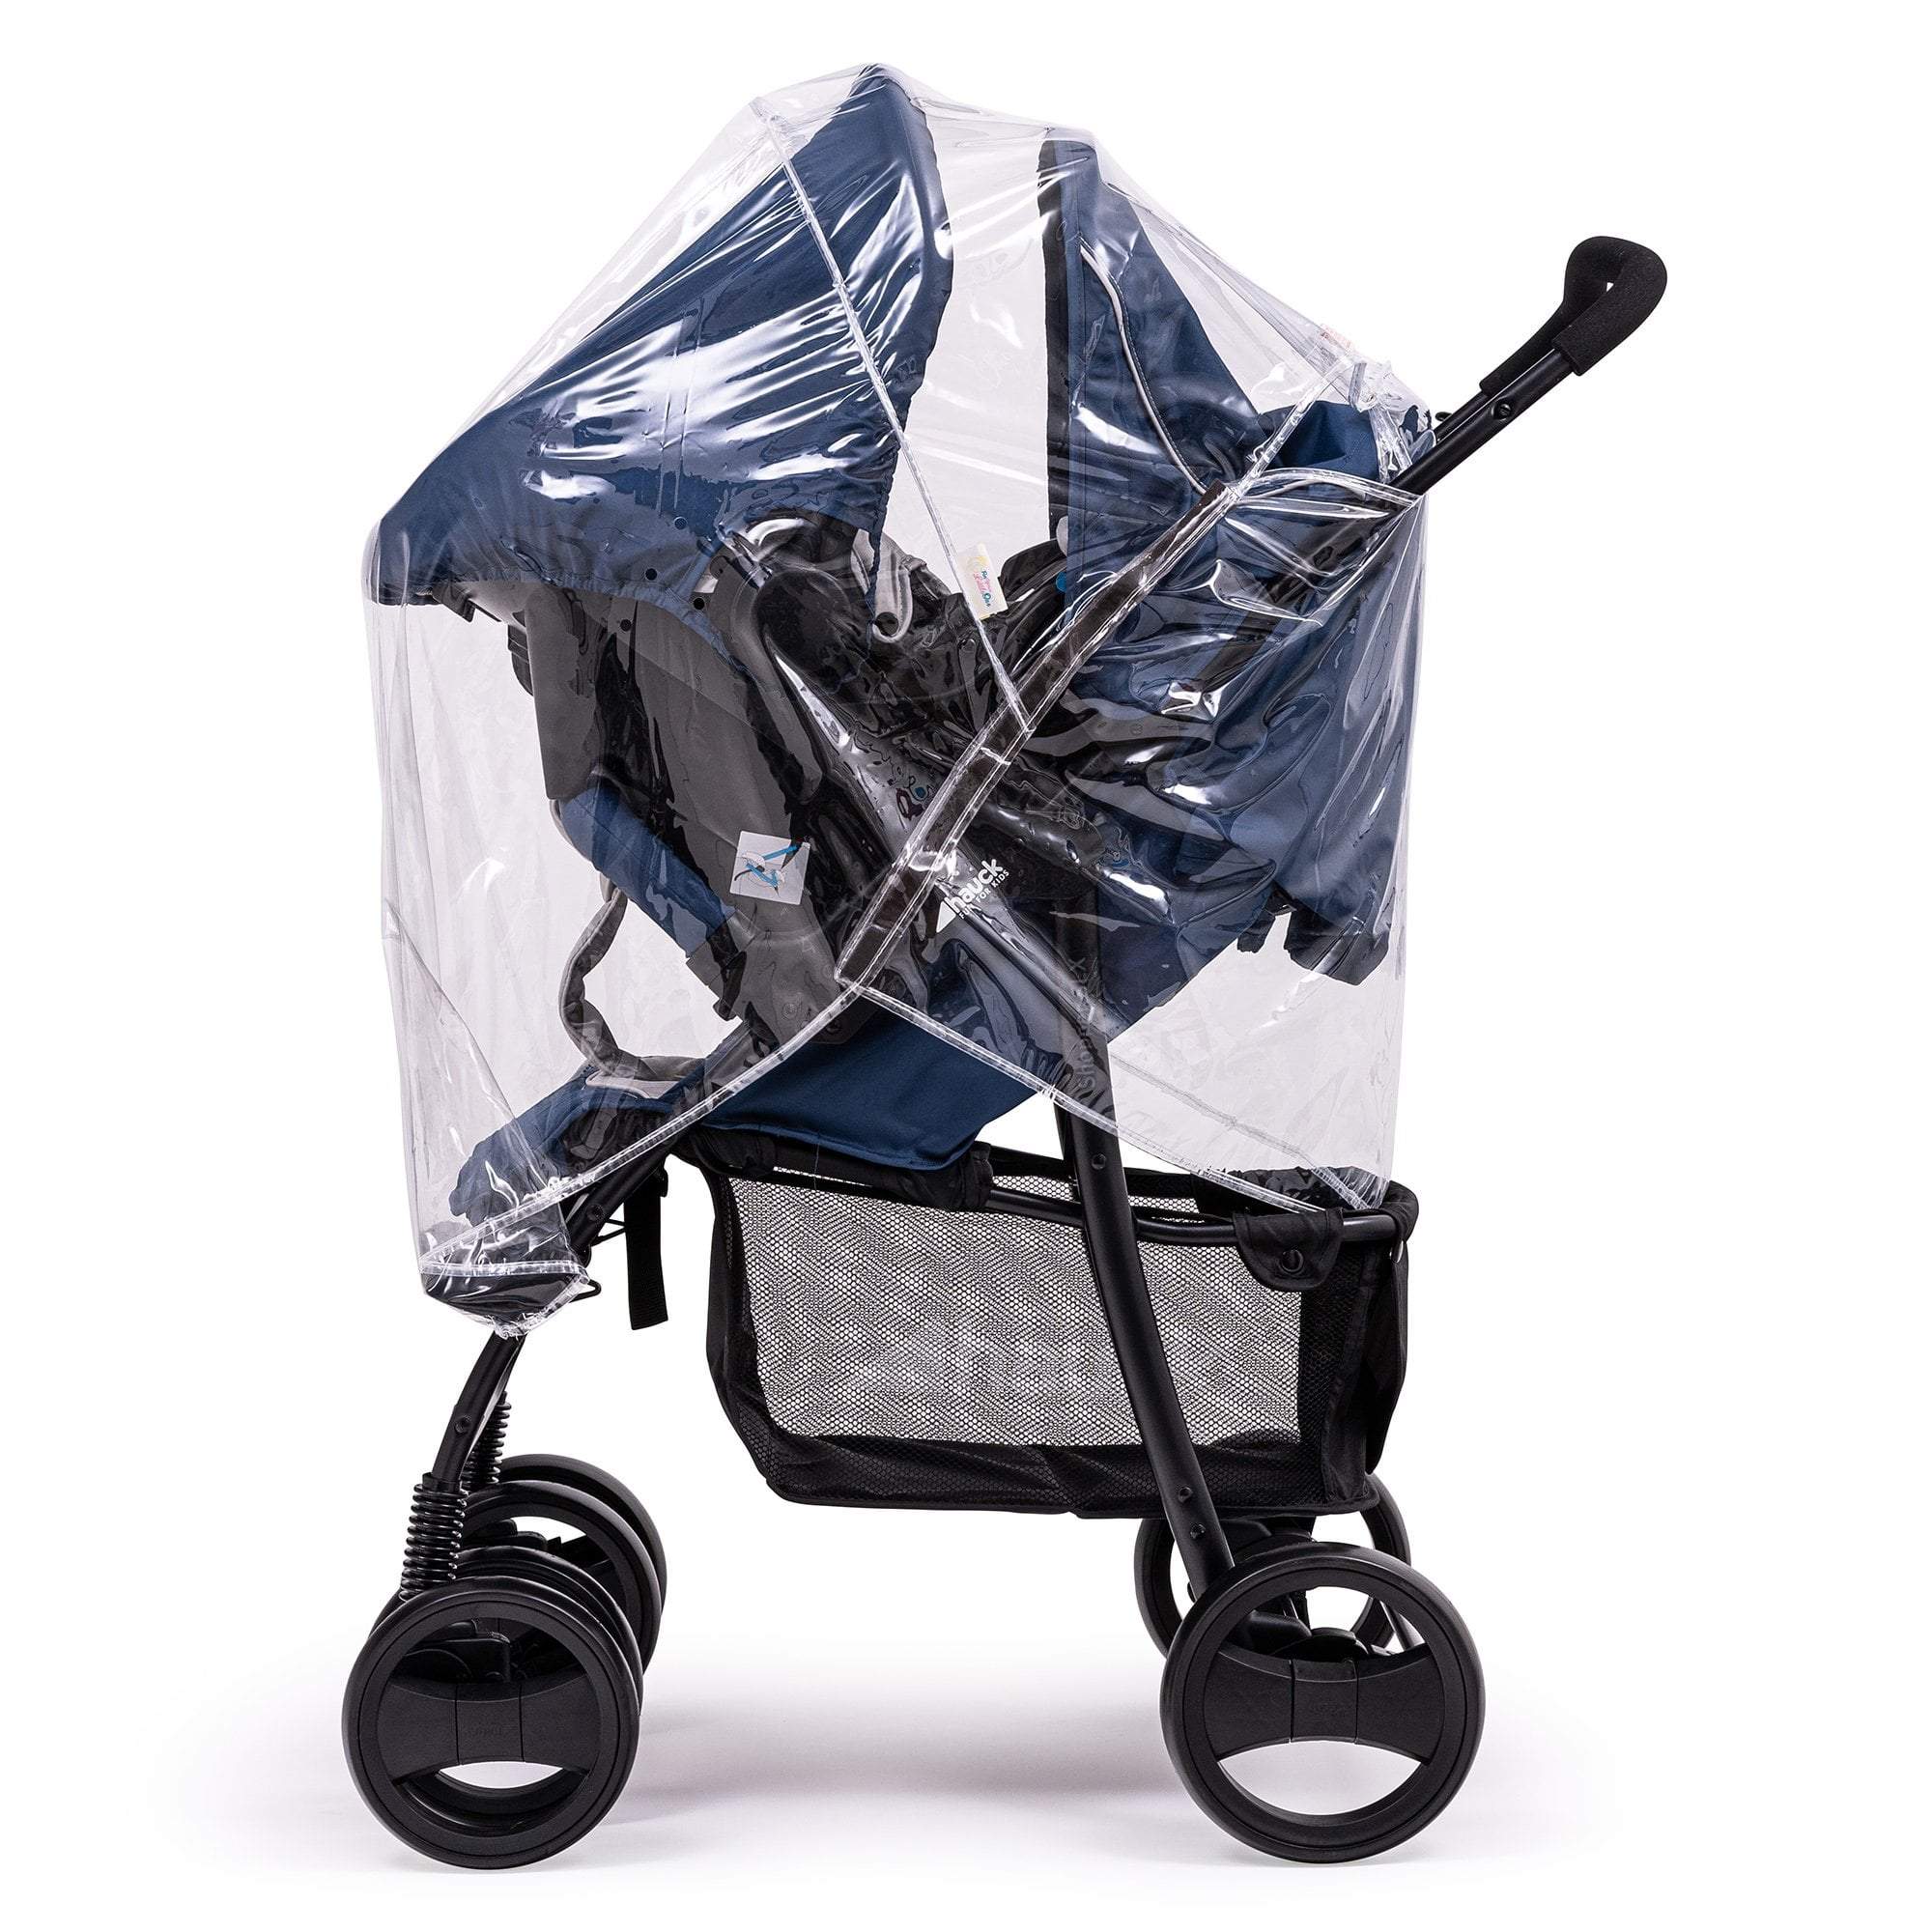 Travel System Raincover Compatible with Unilove - Fits All Models - For Your Little One